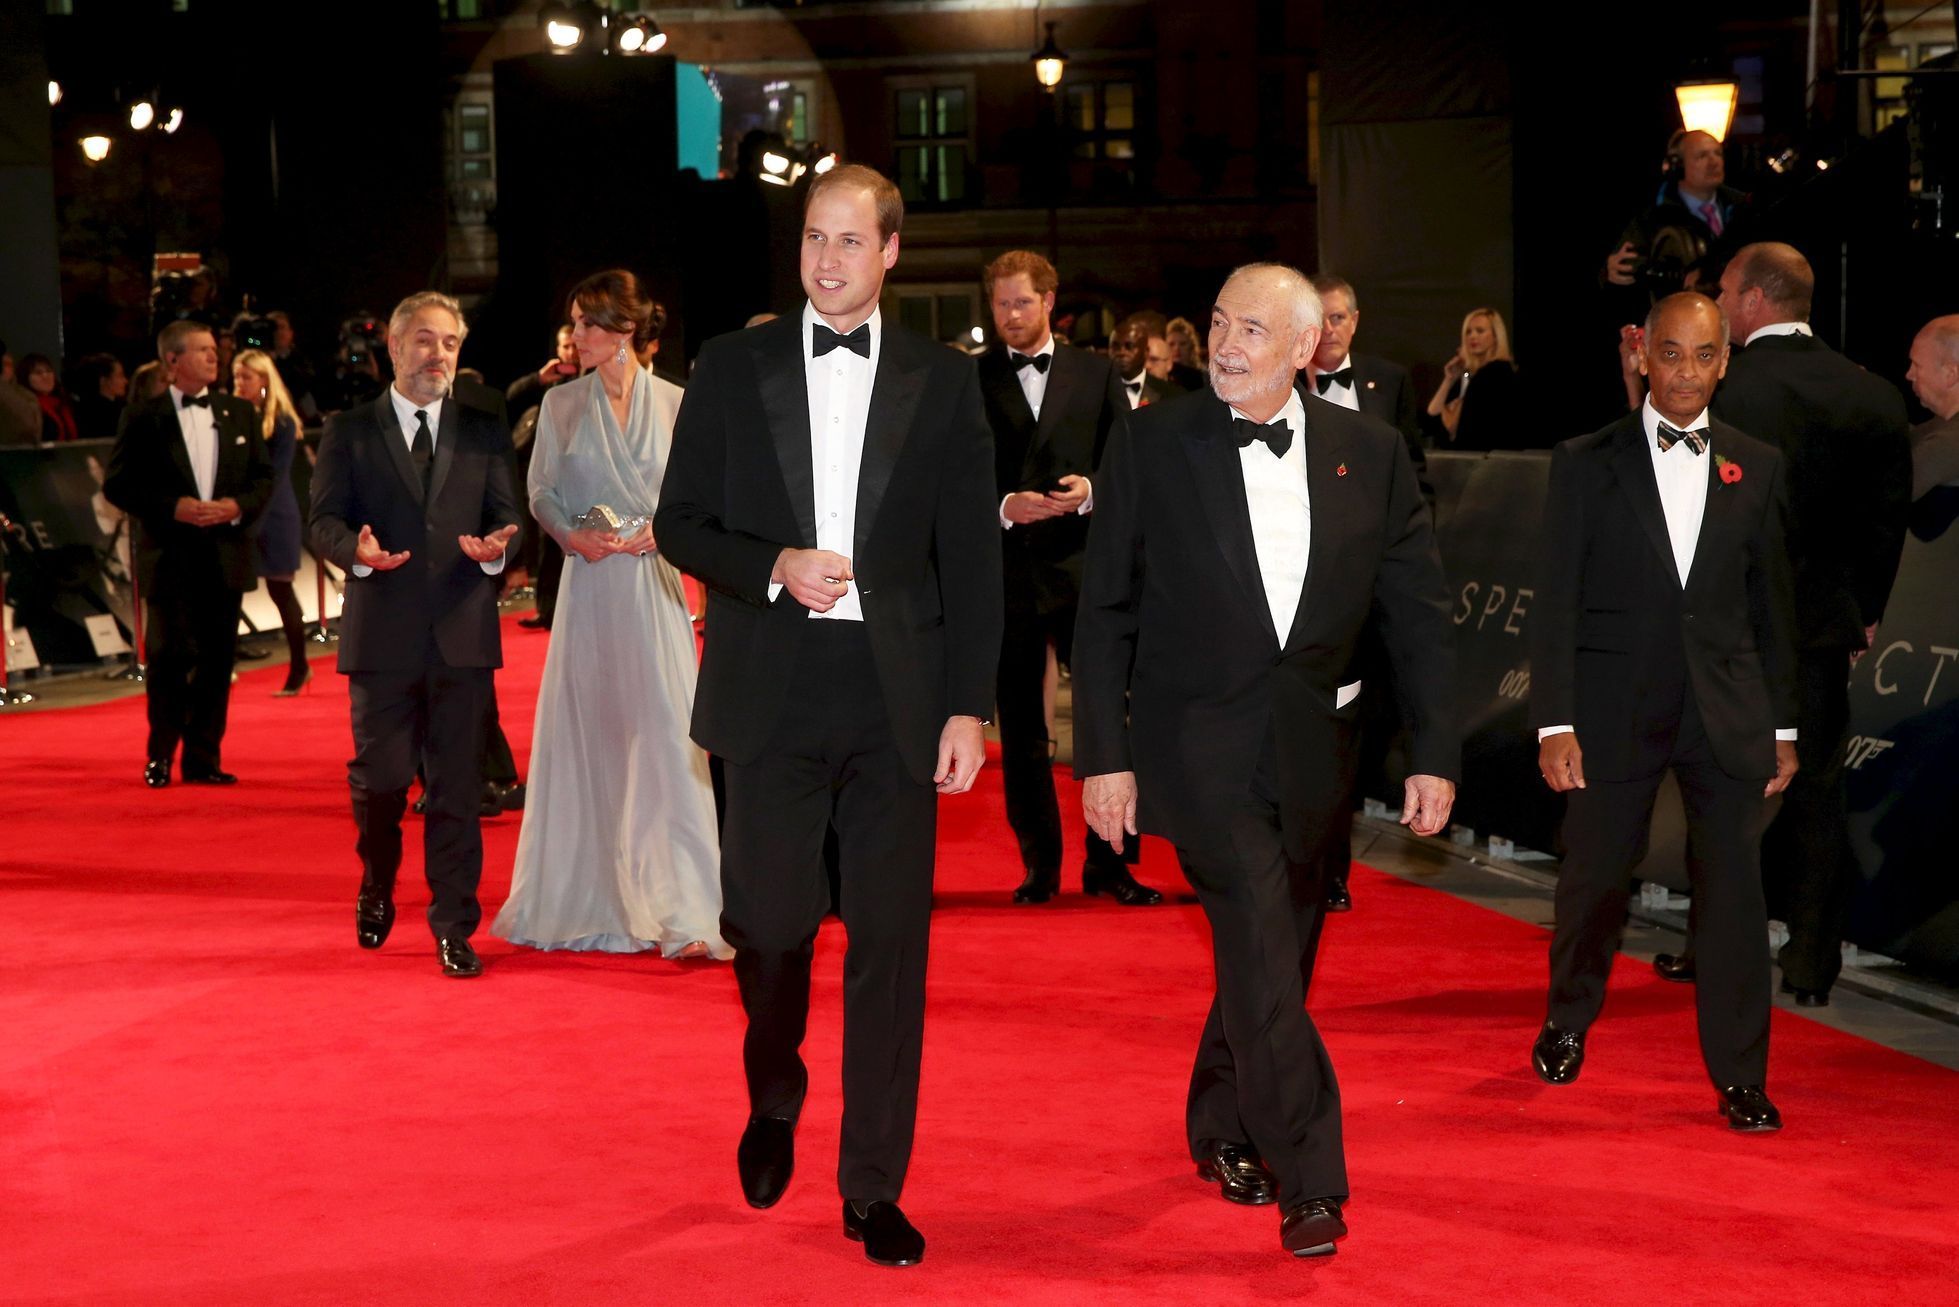 Sam Mendes, Duchess of Cambridge, Duke of Cambridge, Prince Harry and producer Michael G. Wilson attend The Cinema and Television Benevolent Fund's Royal Film Performance 2015 of the new Jame